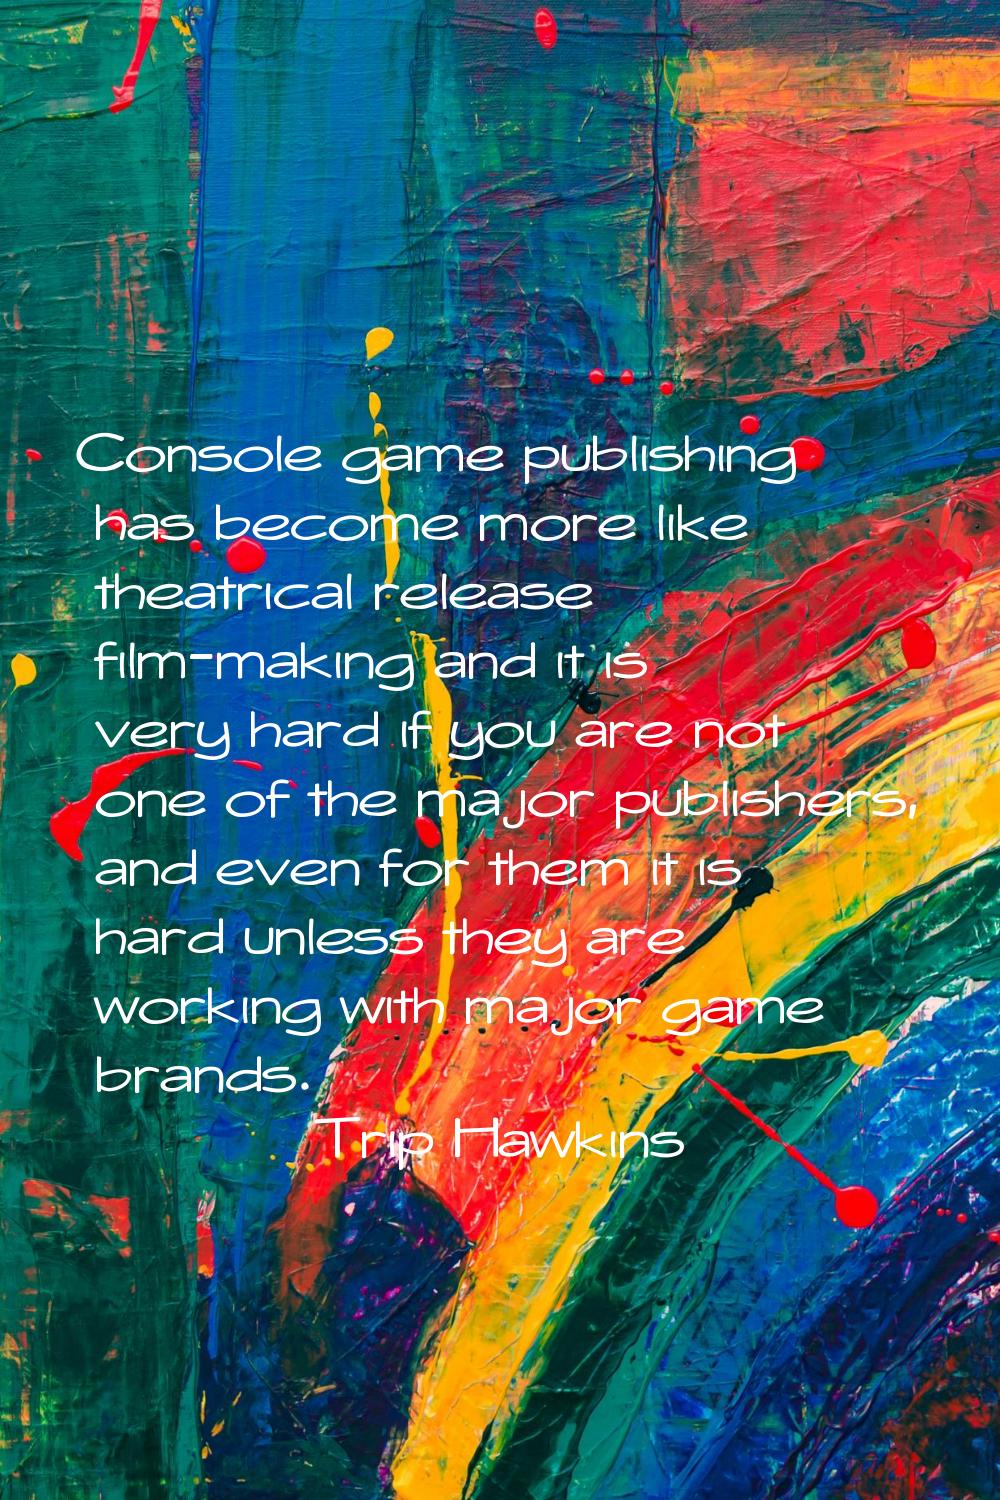 Console game publishing has become more like theatrical release film-making and it is very hard if 